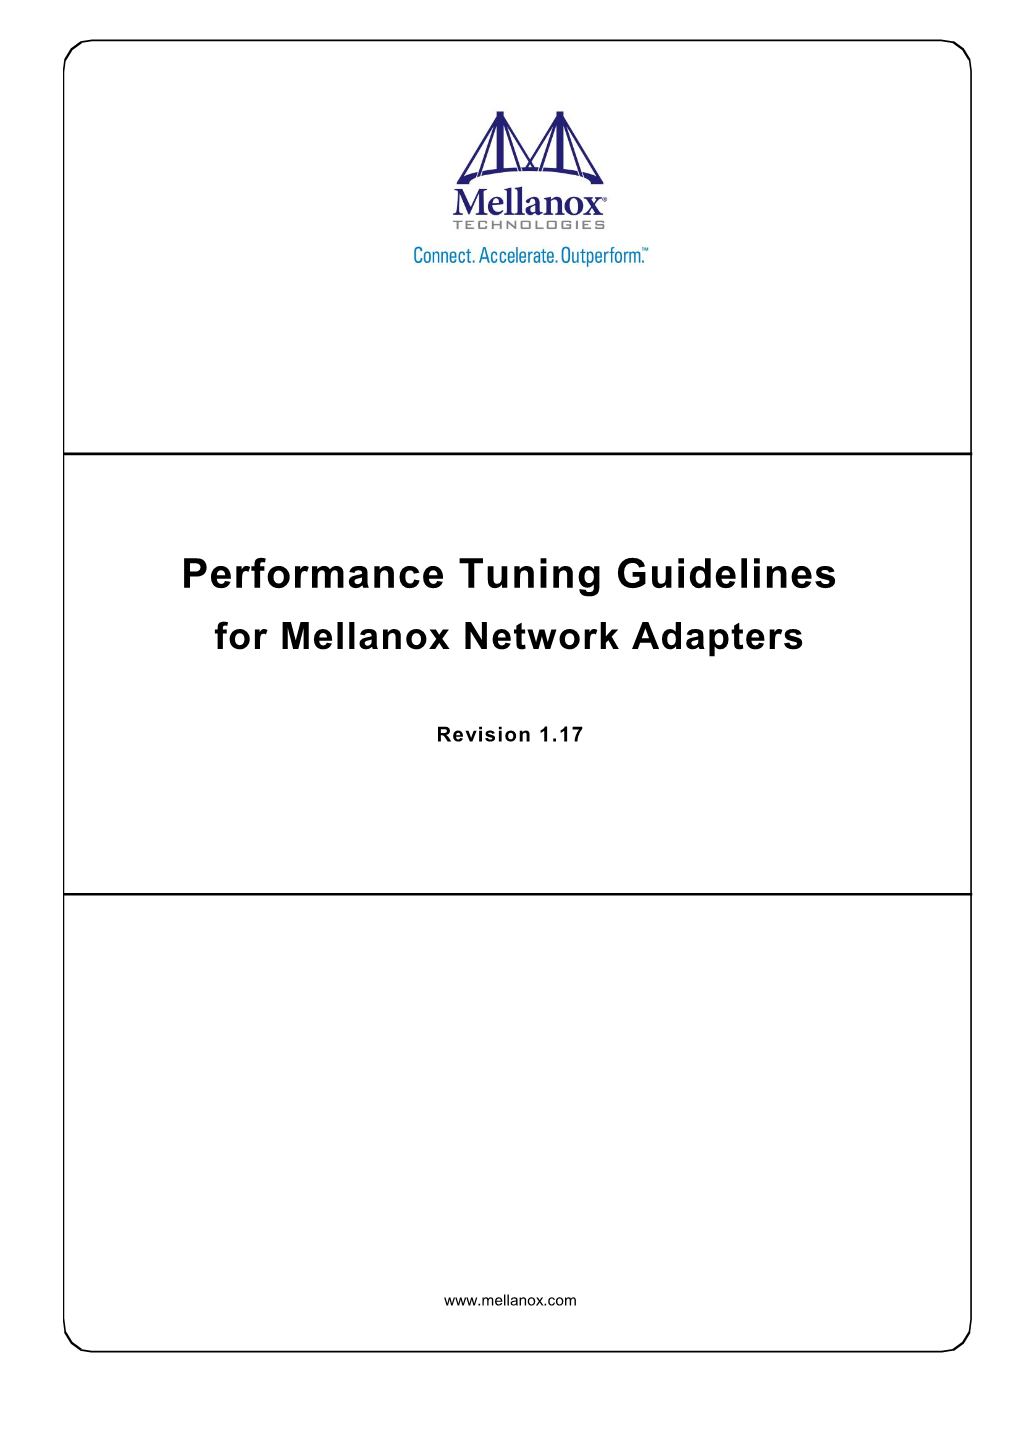 Performance Tuning Guidelines for Mellanox Network Adapters